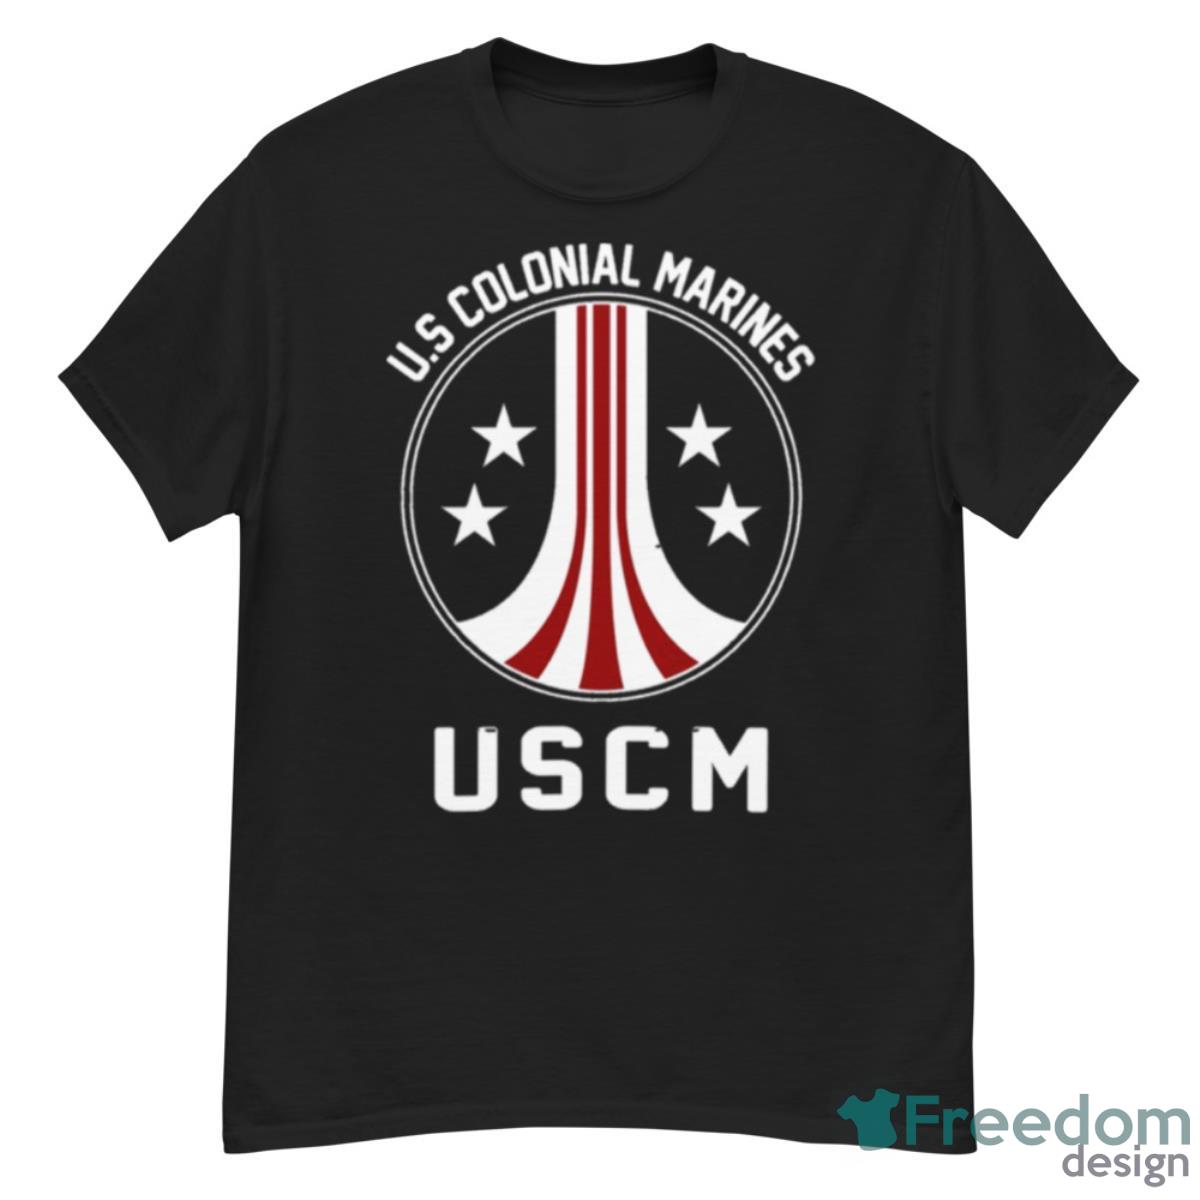 United States Colonial Marines Uscm Stratosphere Shirt - G500 Men’s Classic T-Shirt